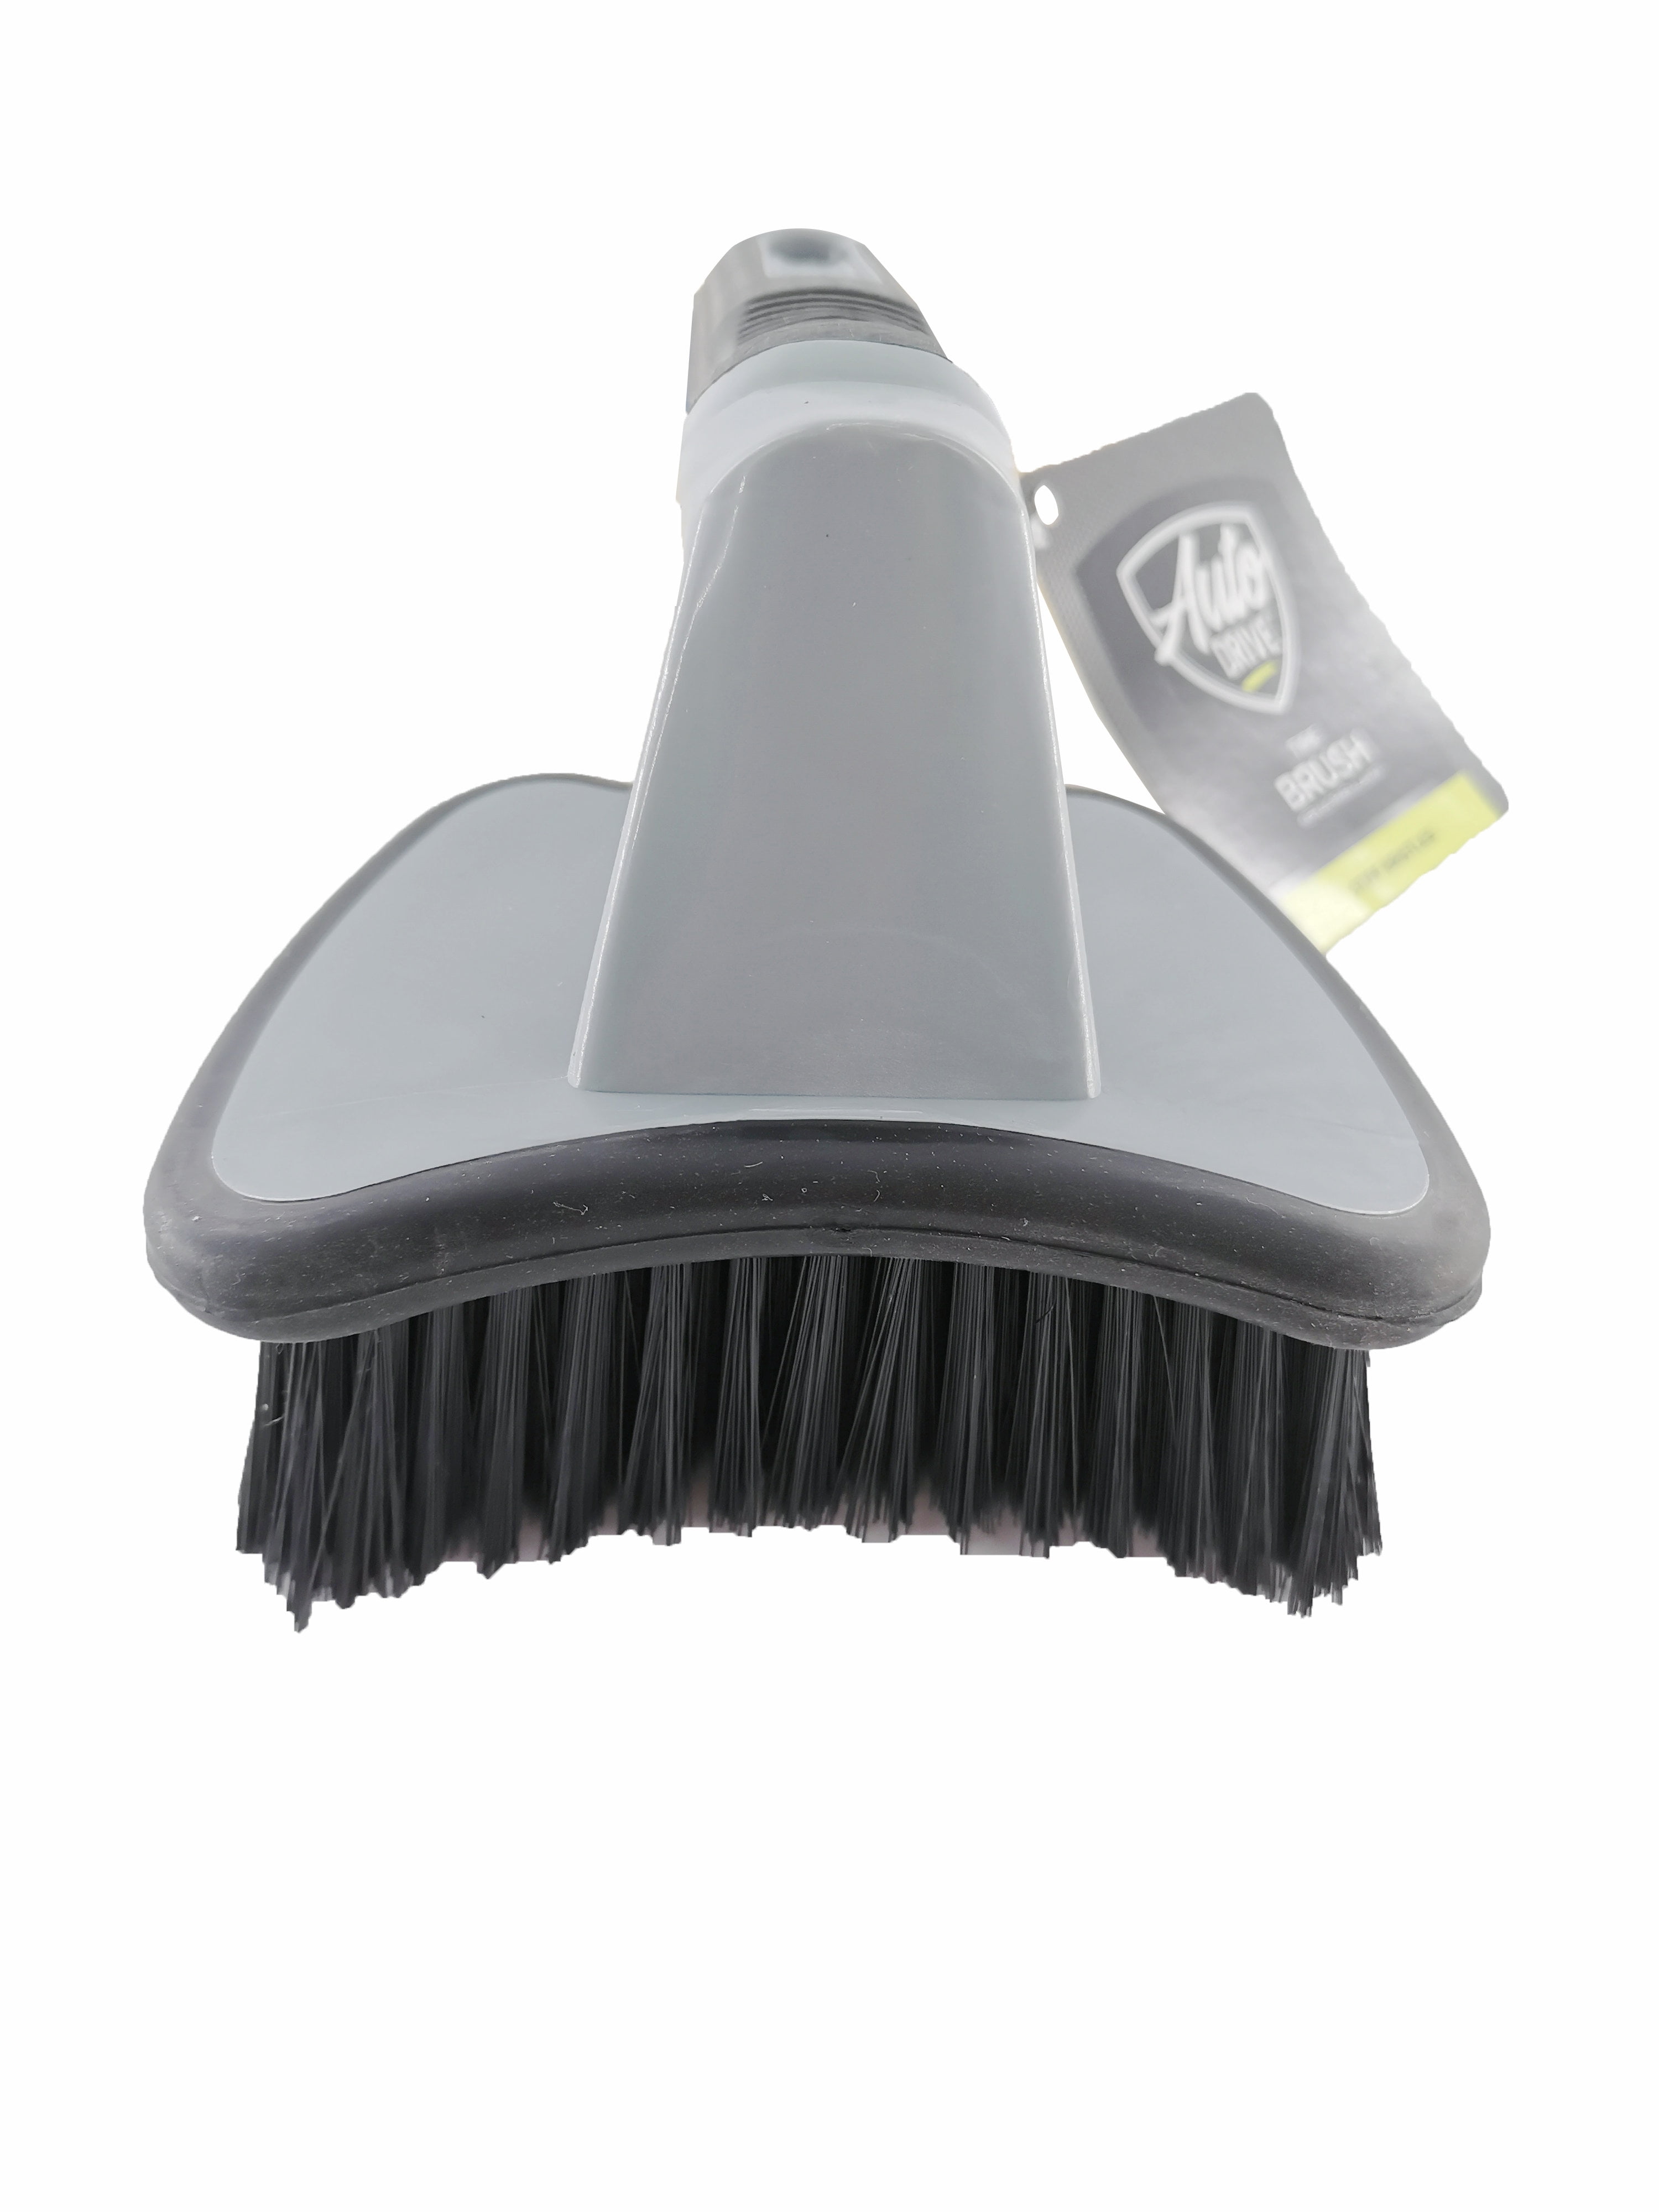 VIKING Tire Brush for Car, Wheel Brush for Car Wash, Cleaning Brush for  Tires, Grey, 10.3 inch x 3.3 inch x 2.3 inch